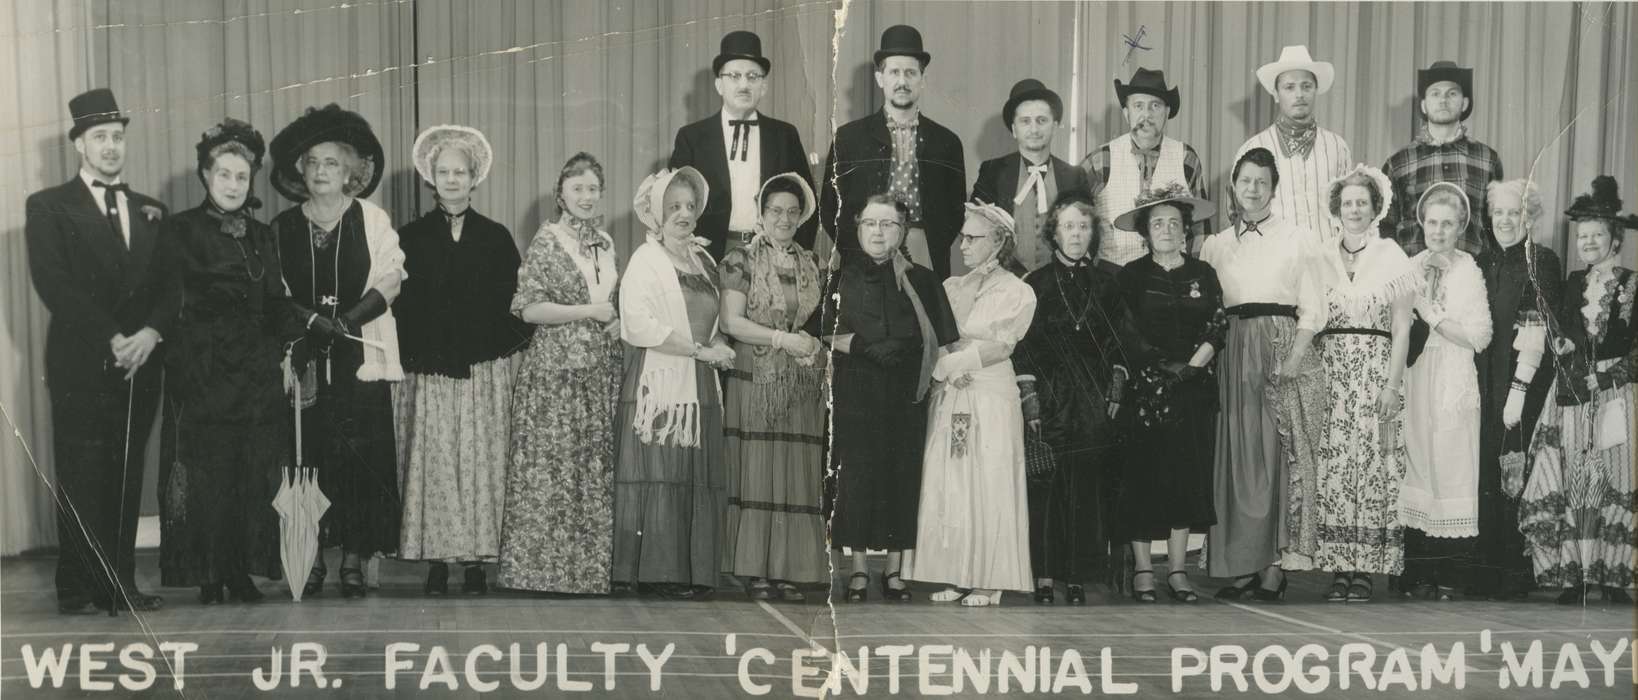 play, Sioux City, IA, performance, Rossiter, Lynn, Portraits - Group, Schools and Education, history of Iowa, Iowa History, cowboy hat, umbrella, stage, Entertainment, Iowa